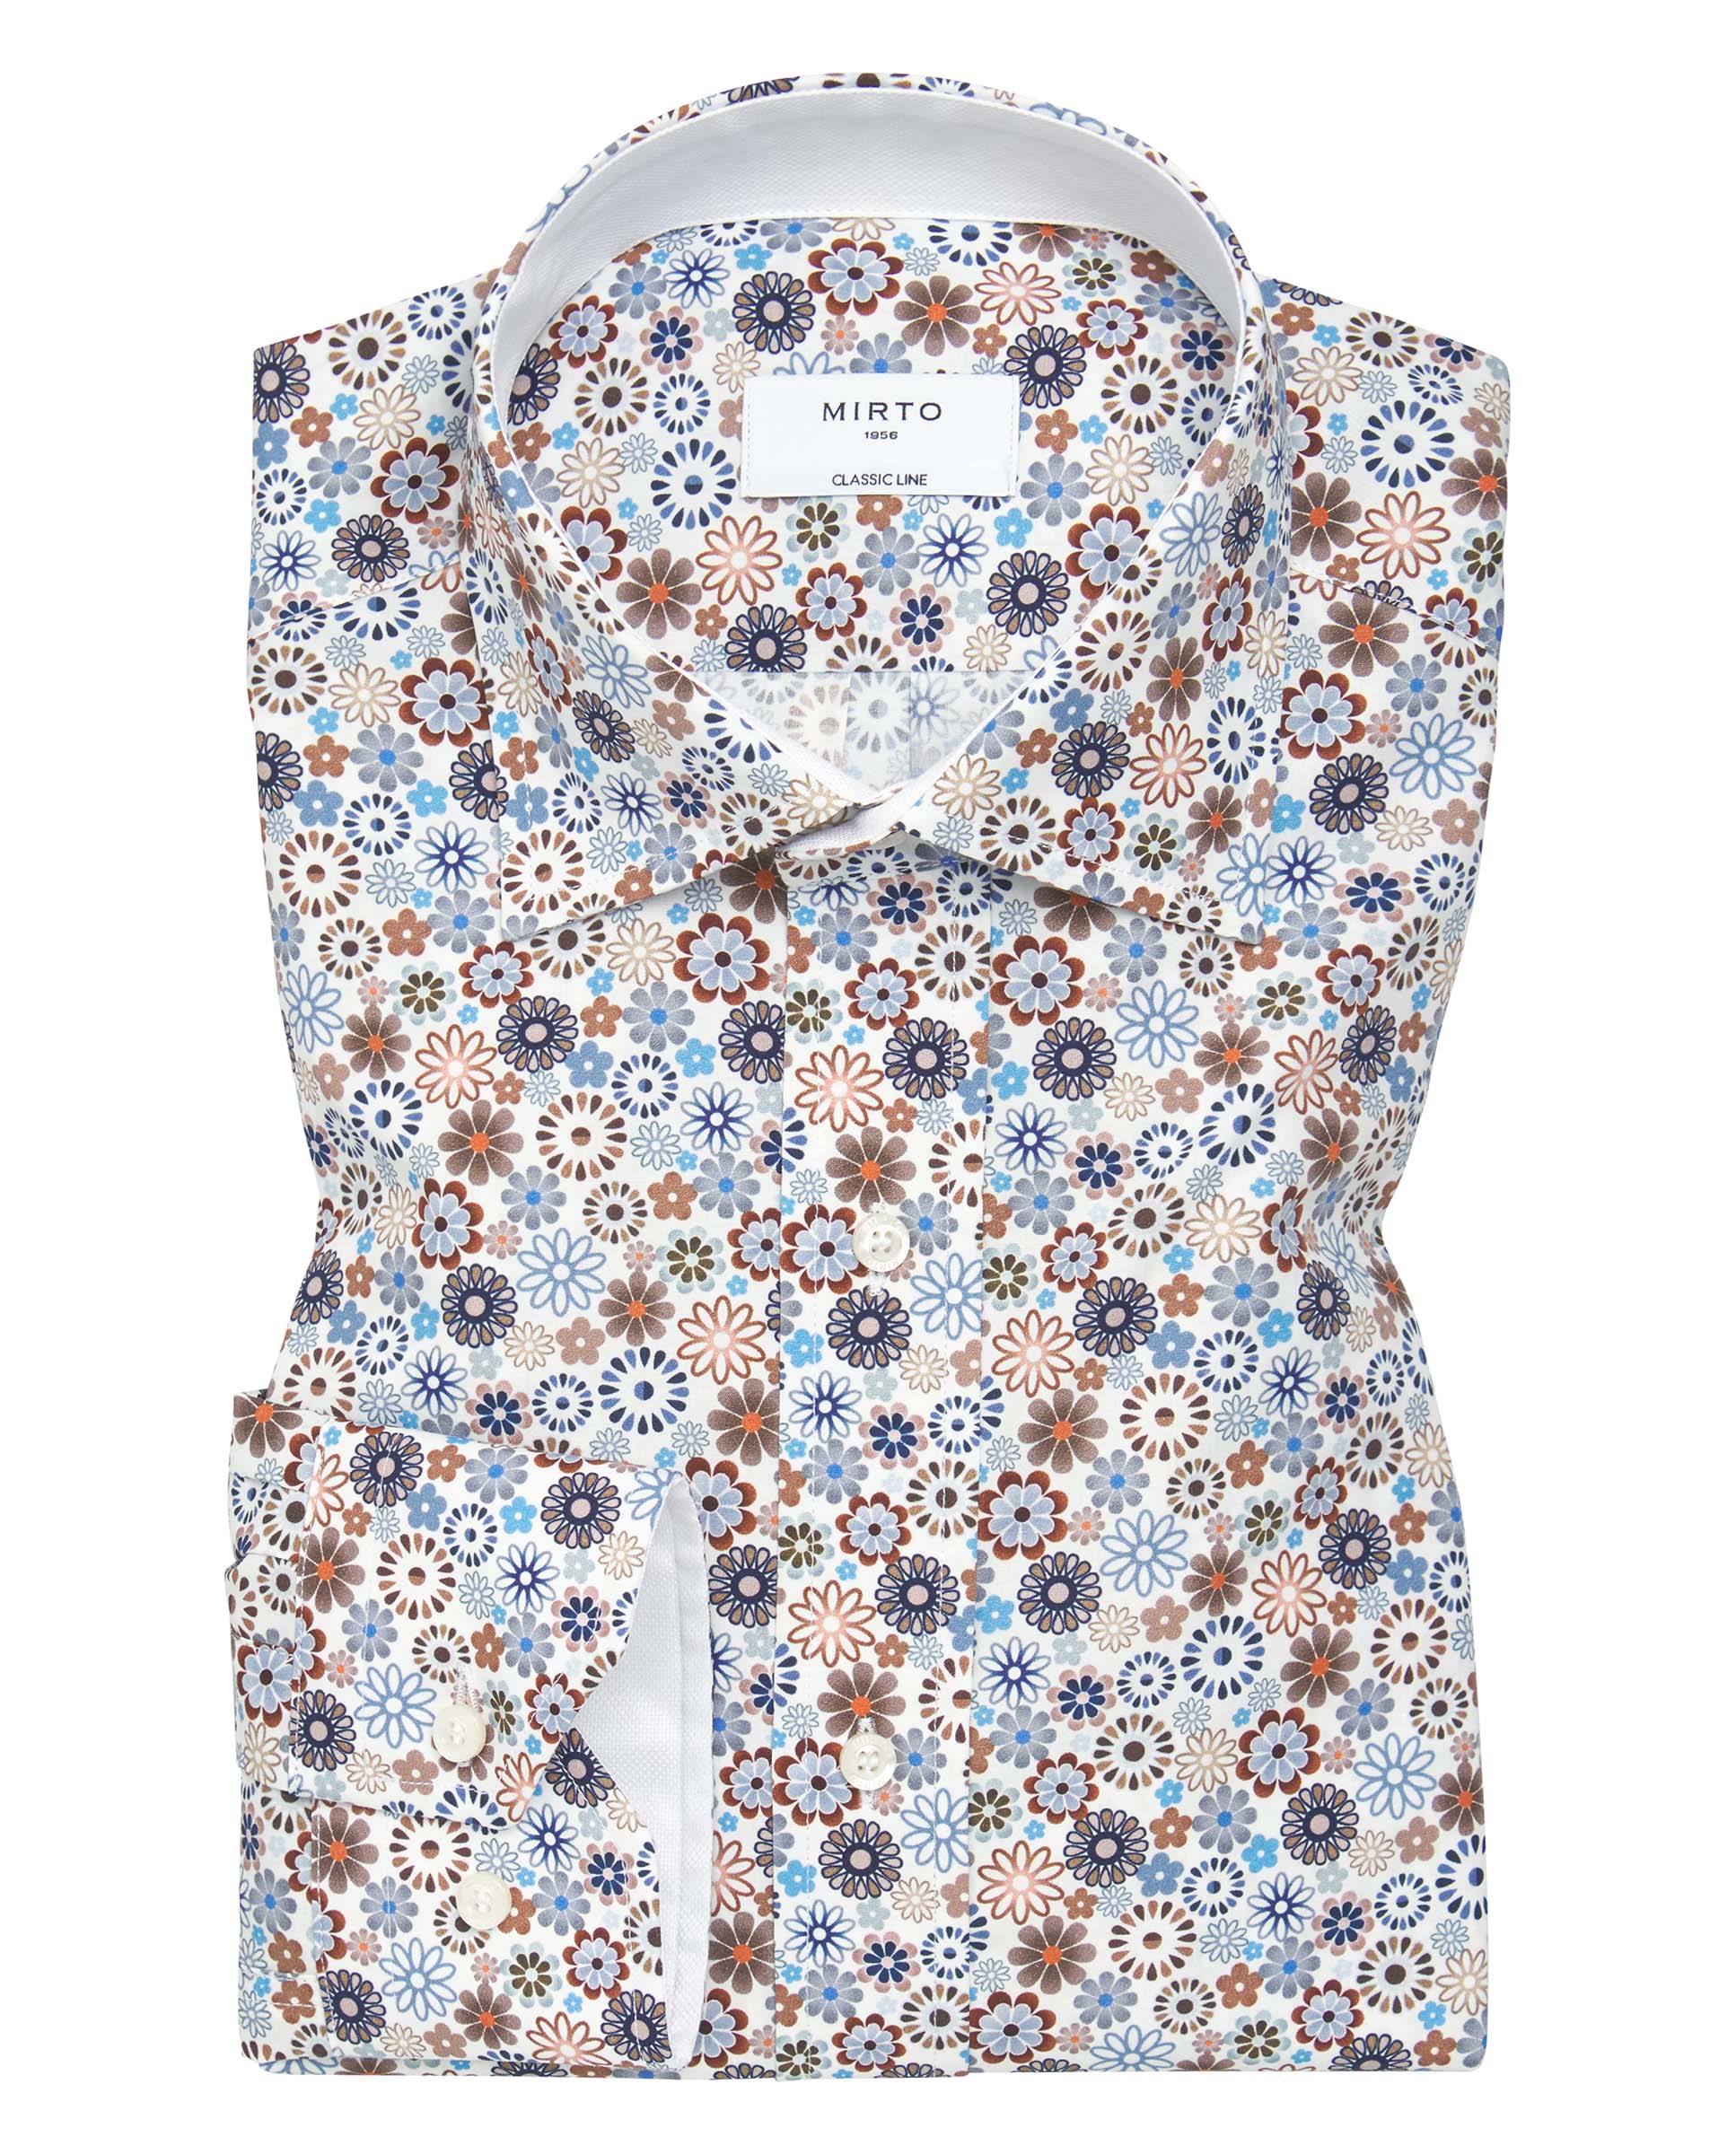 Brown cotton floral print casual shirt by MIRTO